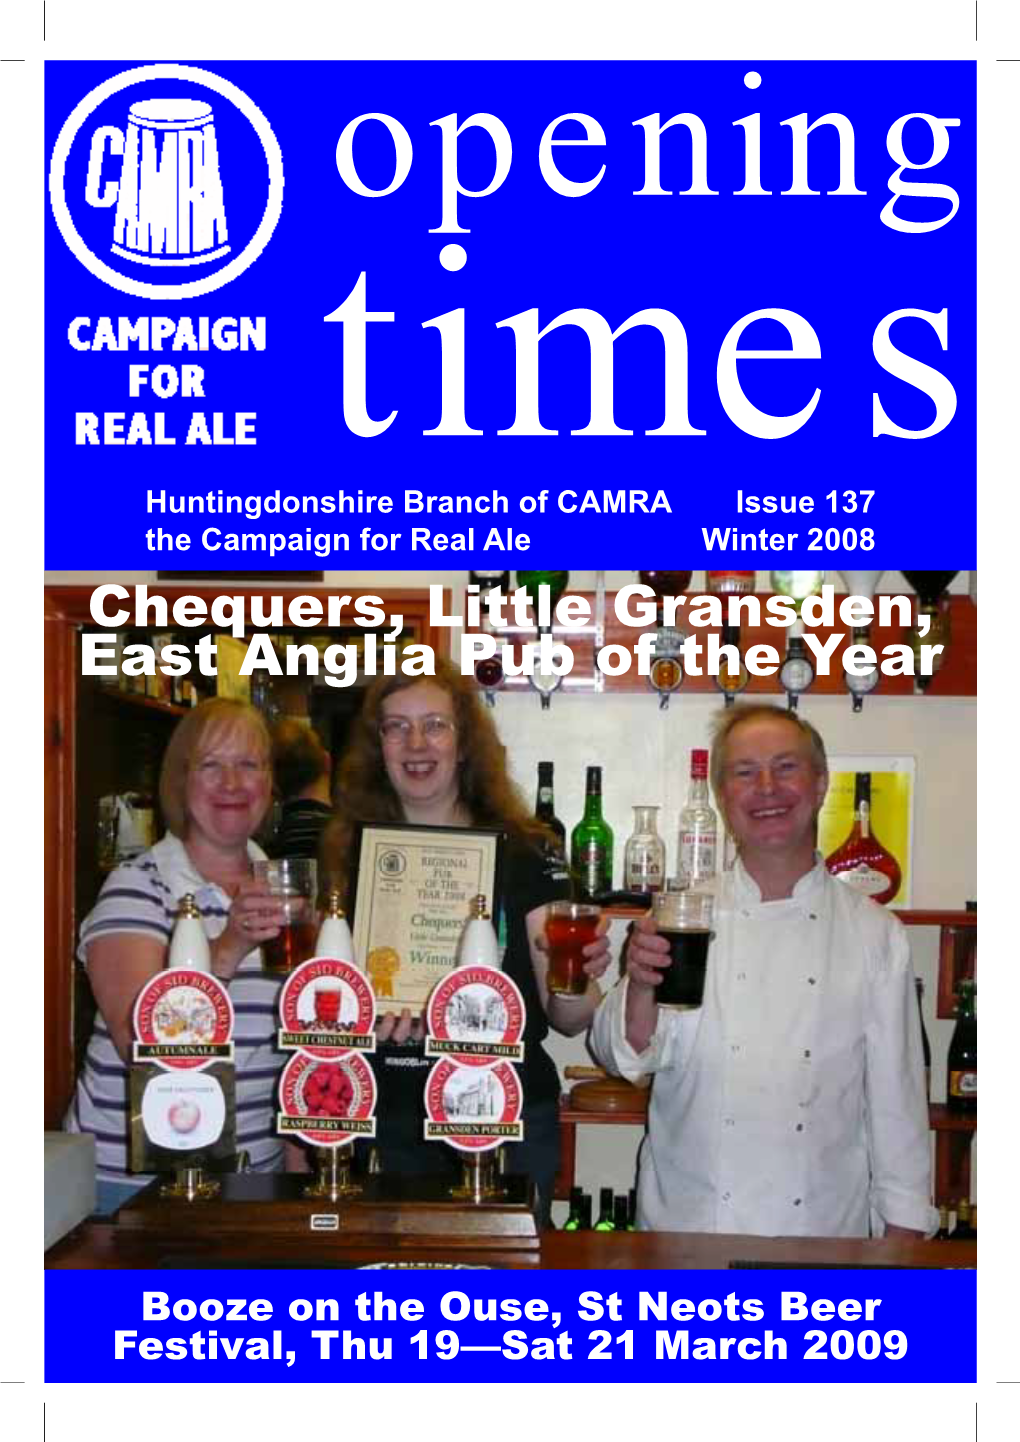 Chequers, Little Gransden, East Anglia Pub of the Year